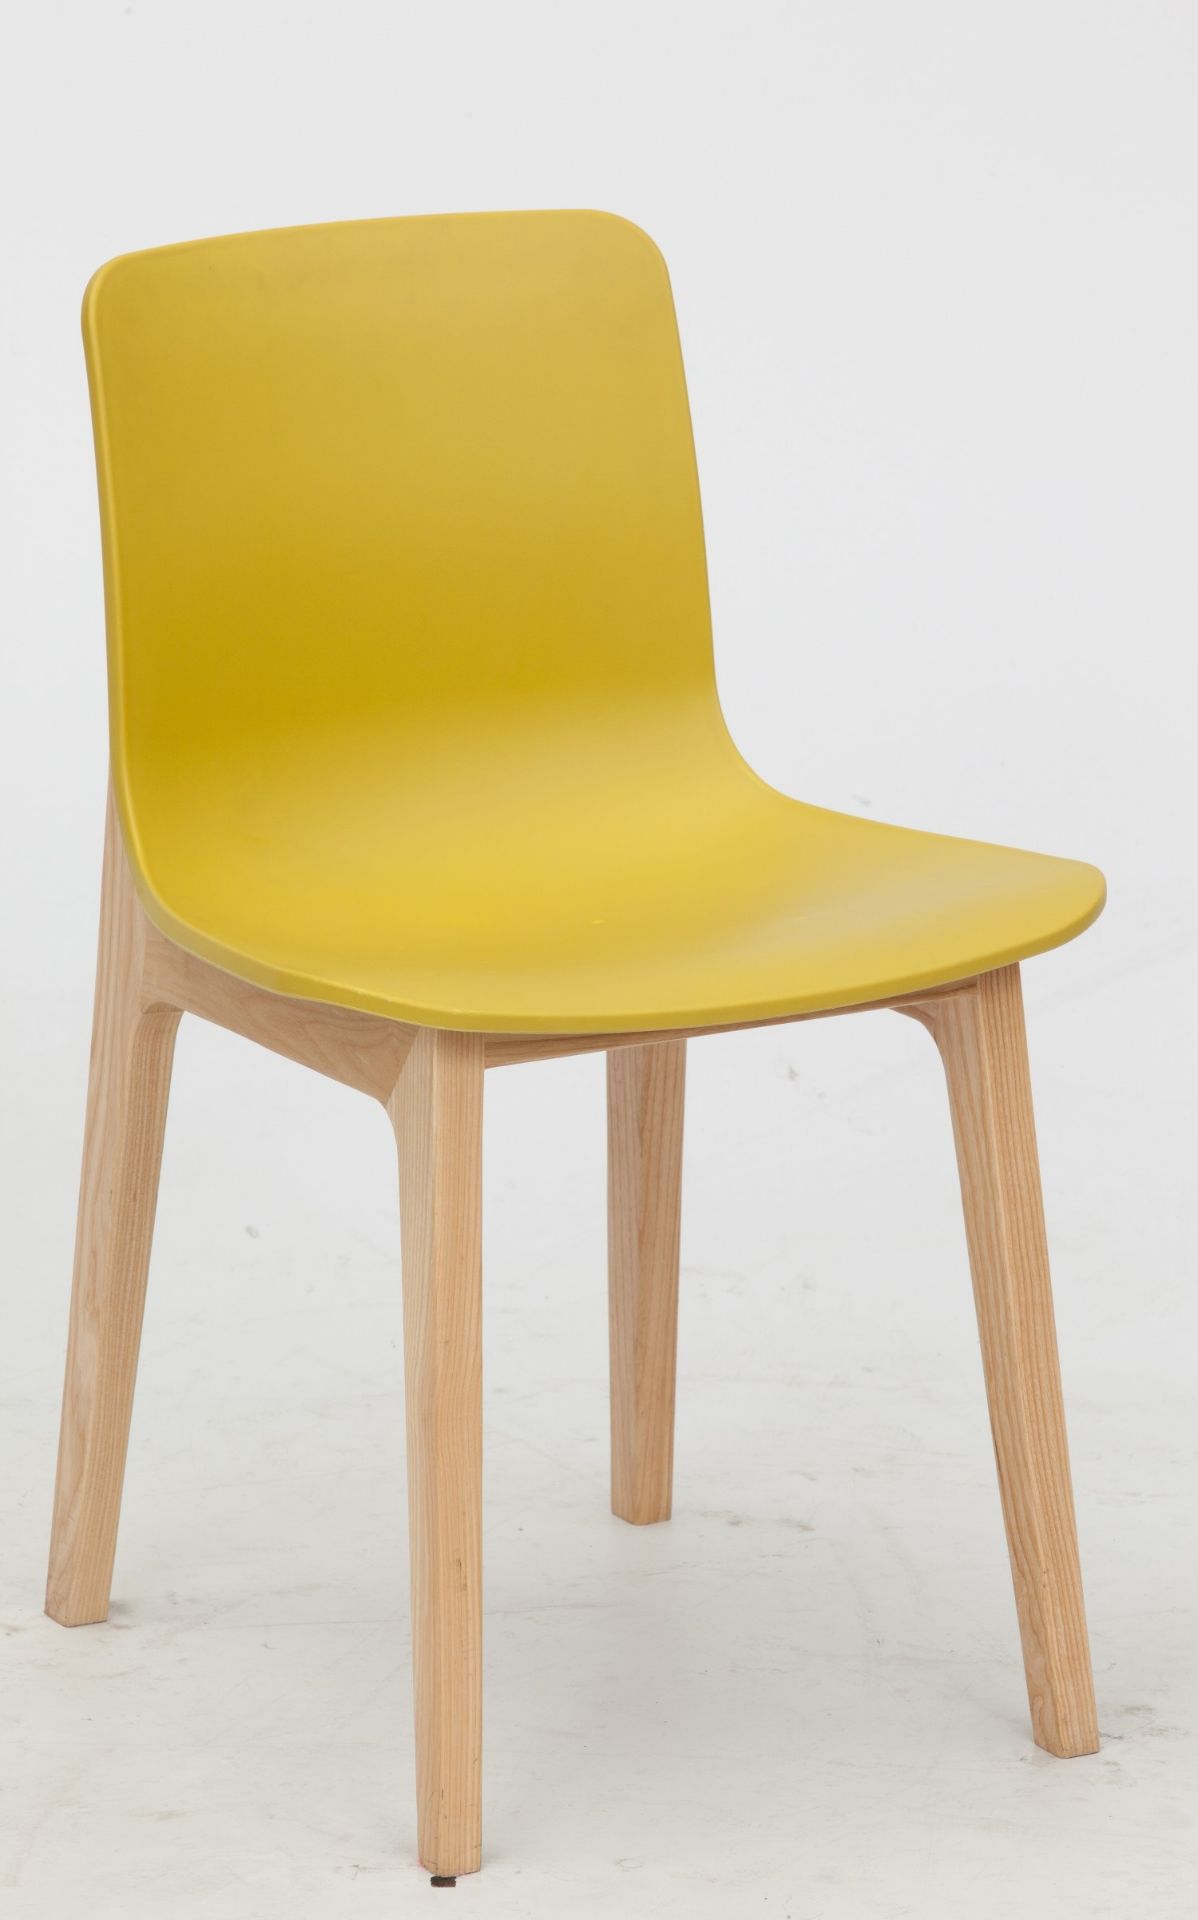 Set of 4 x Swift DC-782W Dining Chairs With Chartreuse Yellow ABS Seats and Dark Wood Bases - - Image 2 of 3